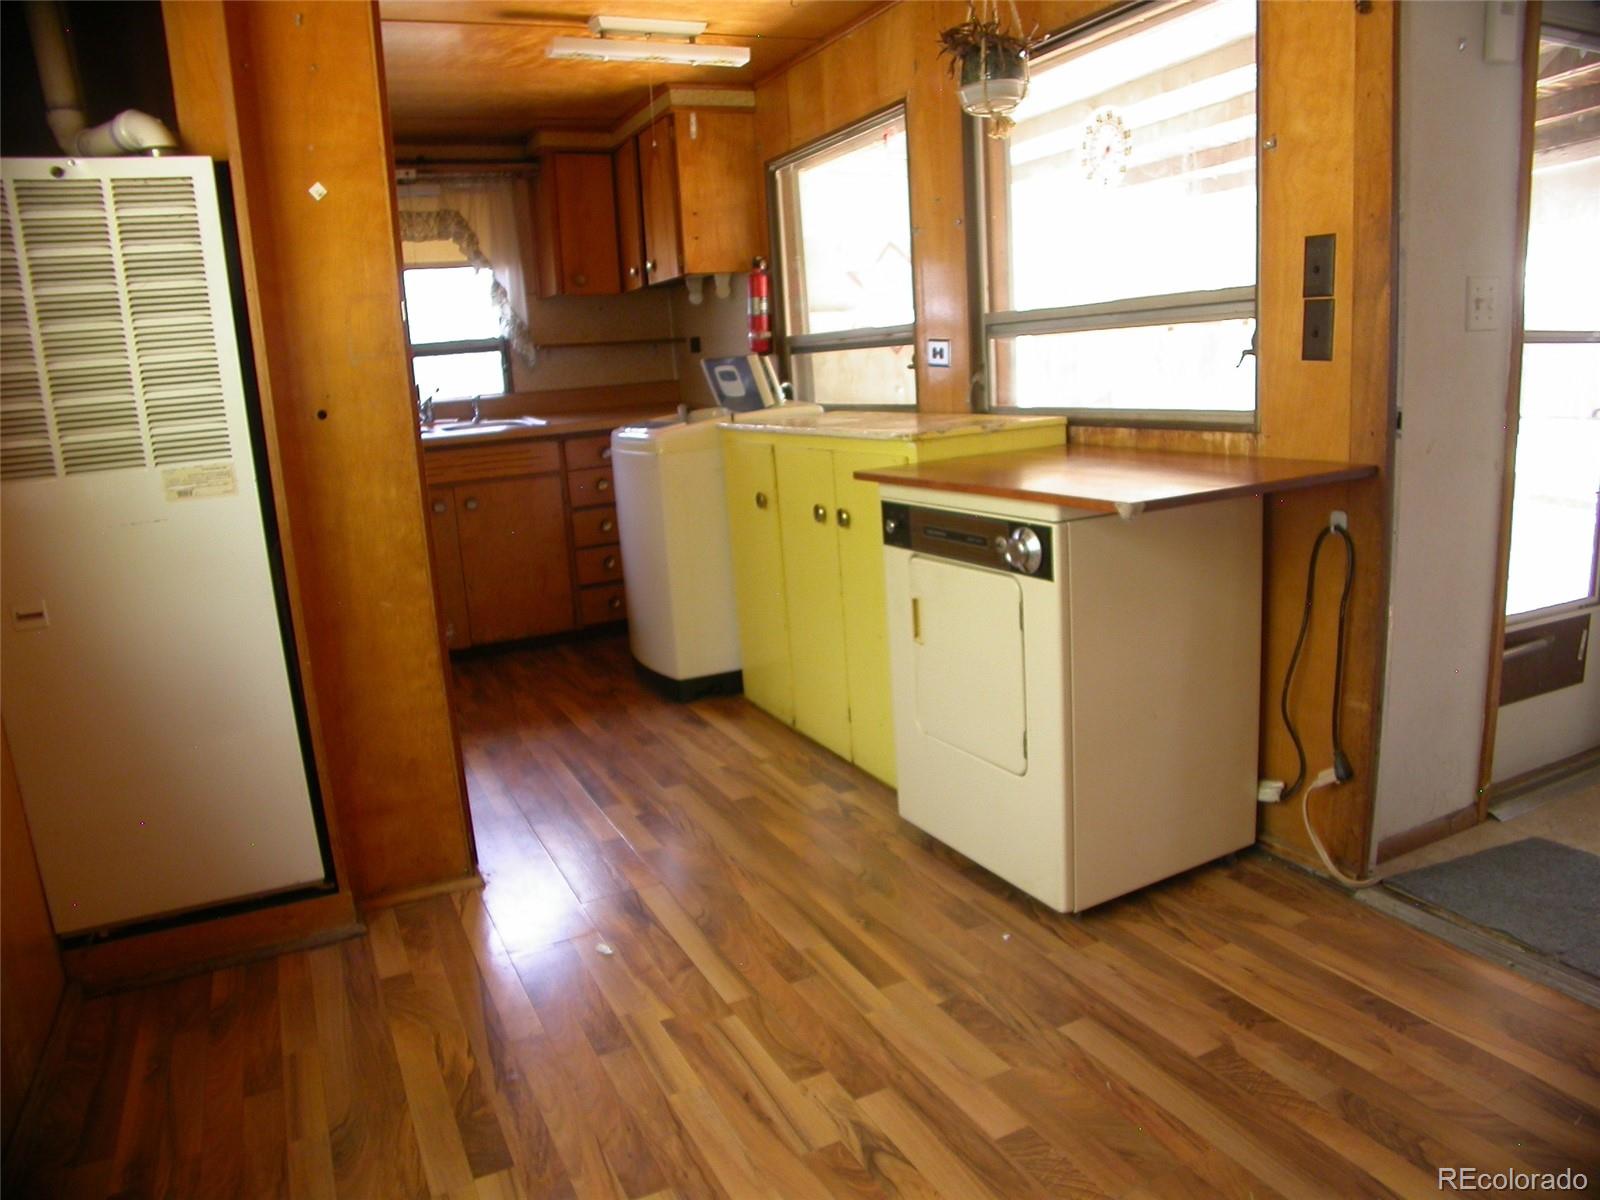 a view of a kitchen with wooden floor and a sink